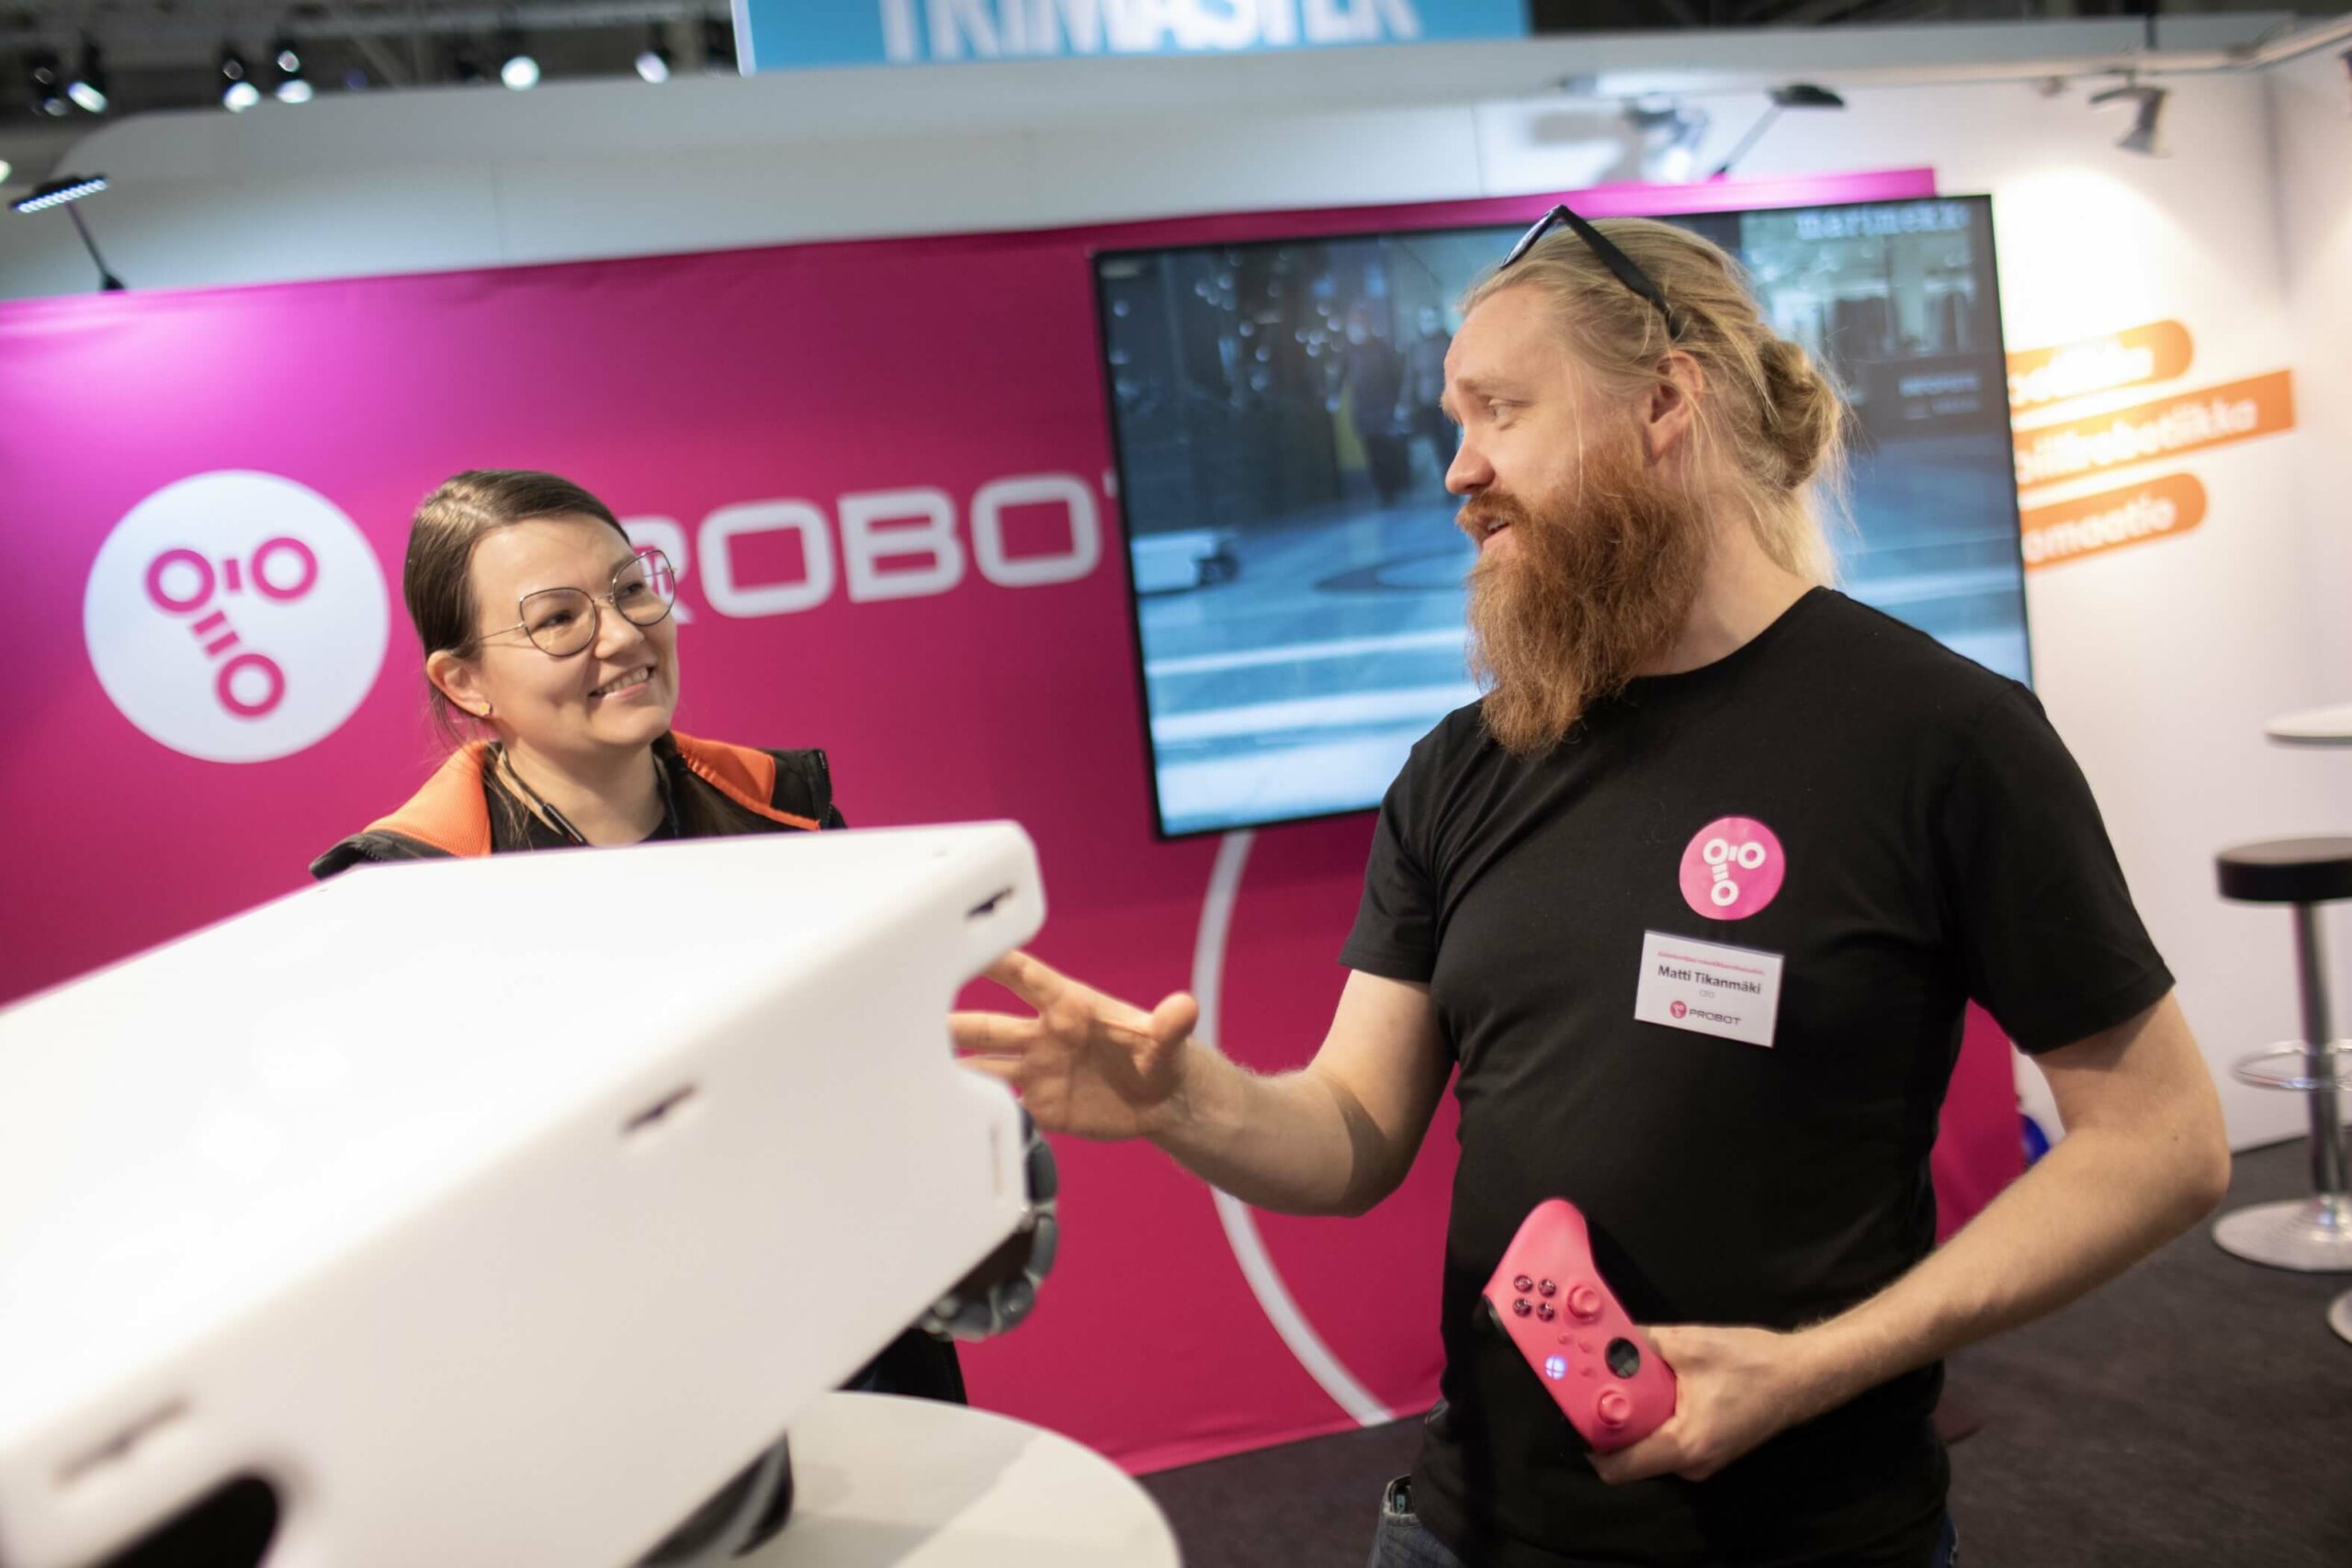 A white mobile robot can be seen in the foreground. Behind it, a man and a woman are talking to each other. In the background, a screen and a pink wall.